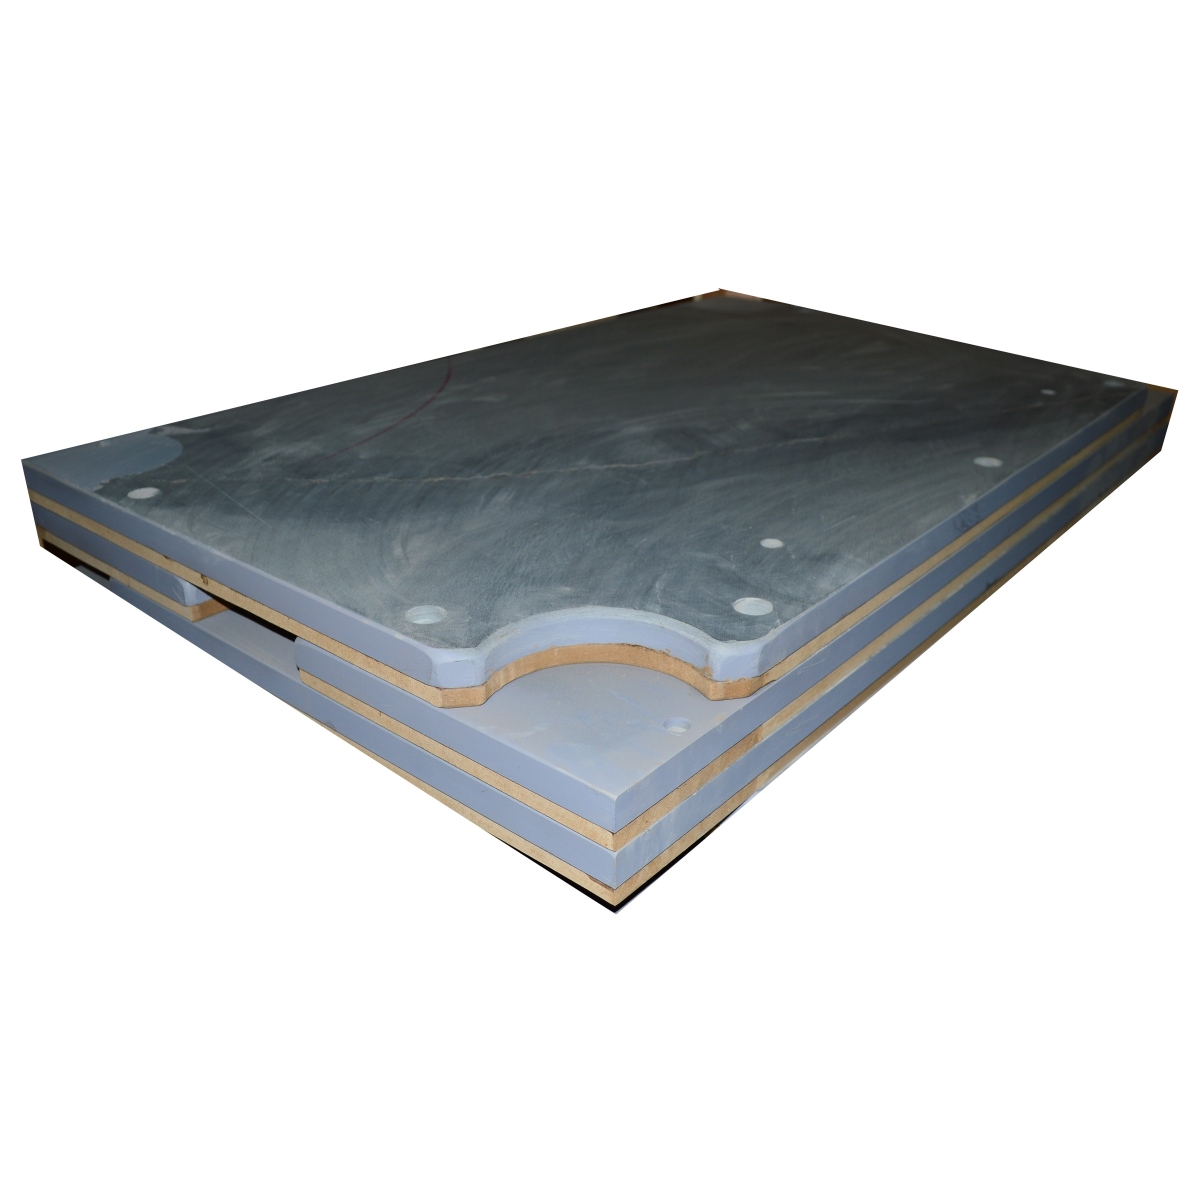 10-128cr Mdf 85 X 46 X 1 In. Kasson Backed Slate Bed